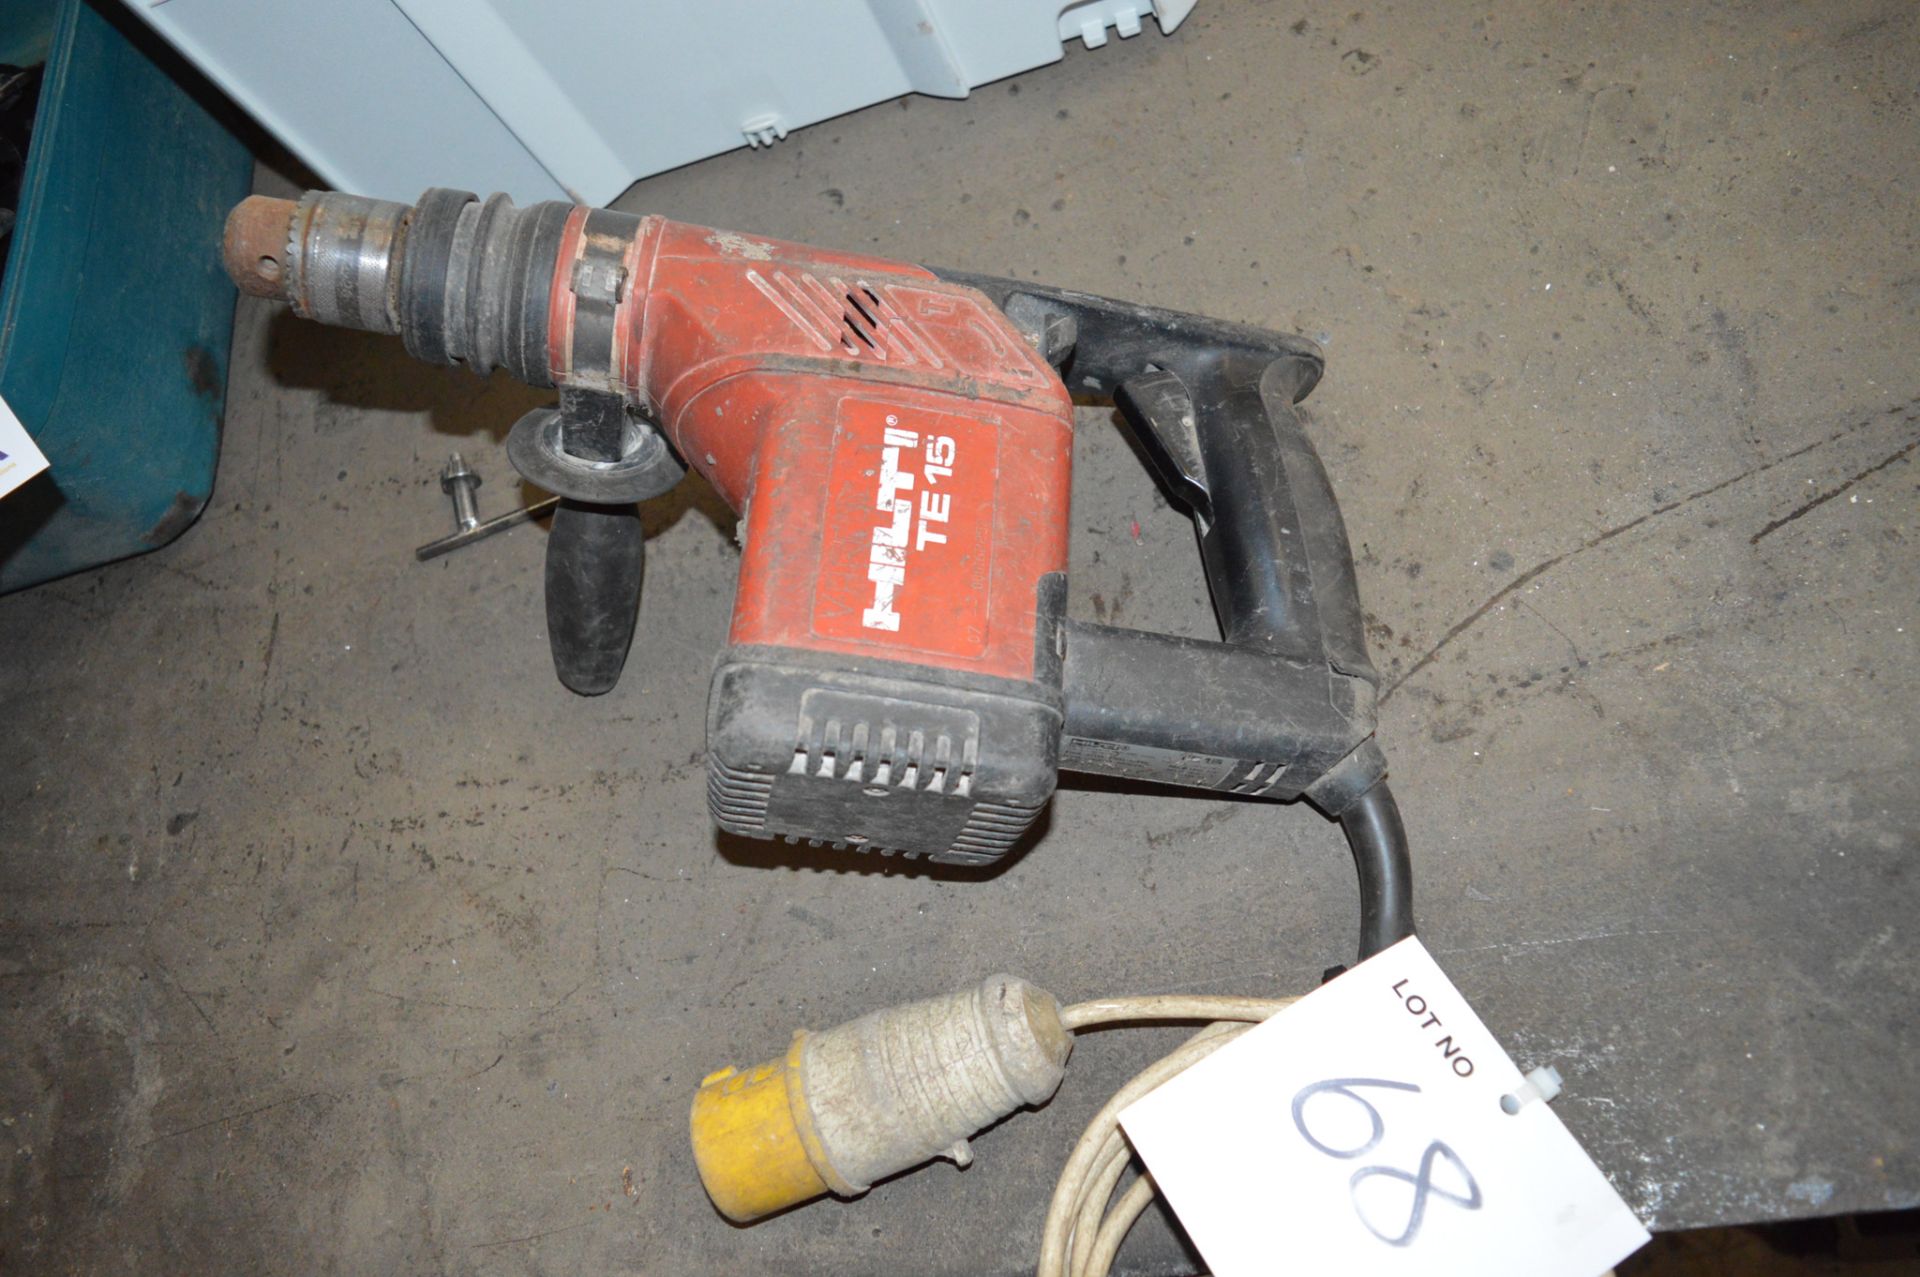 Hilti 110v rotary hammer drill Model: TE15 ** No VAT on hammer price but VAT will be charged on - Image 2 of 2